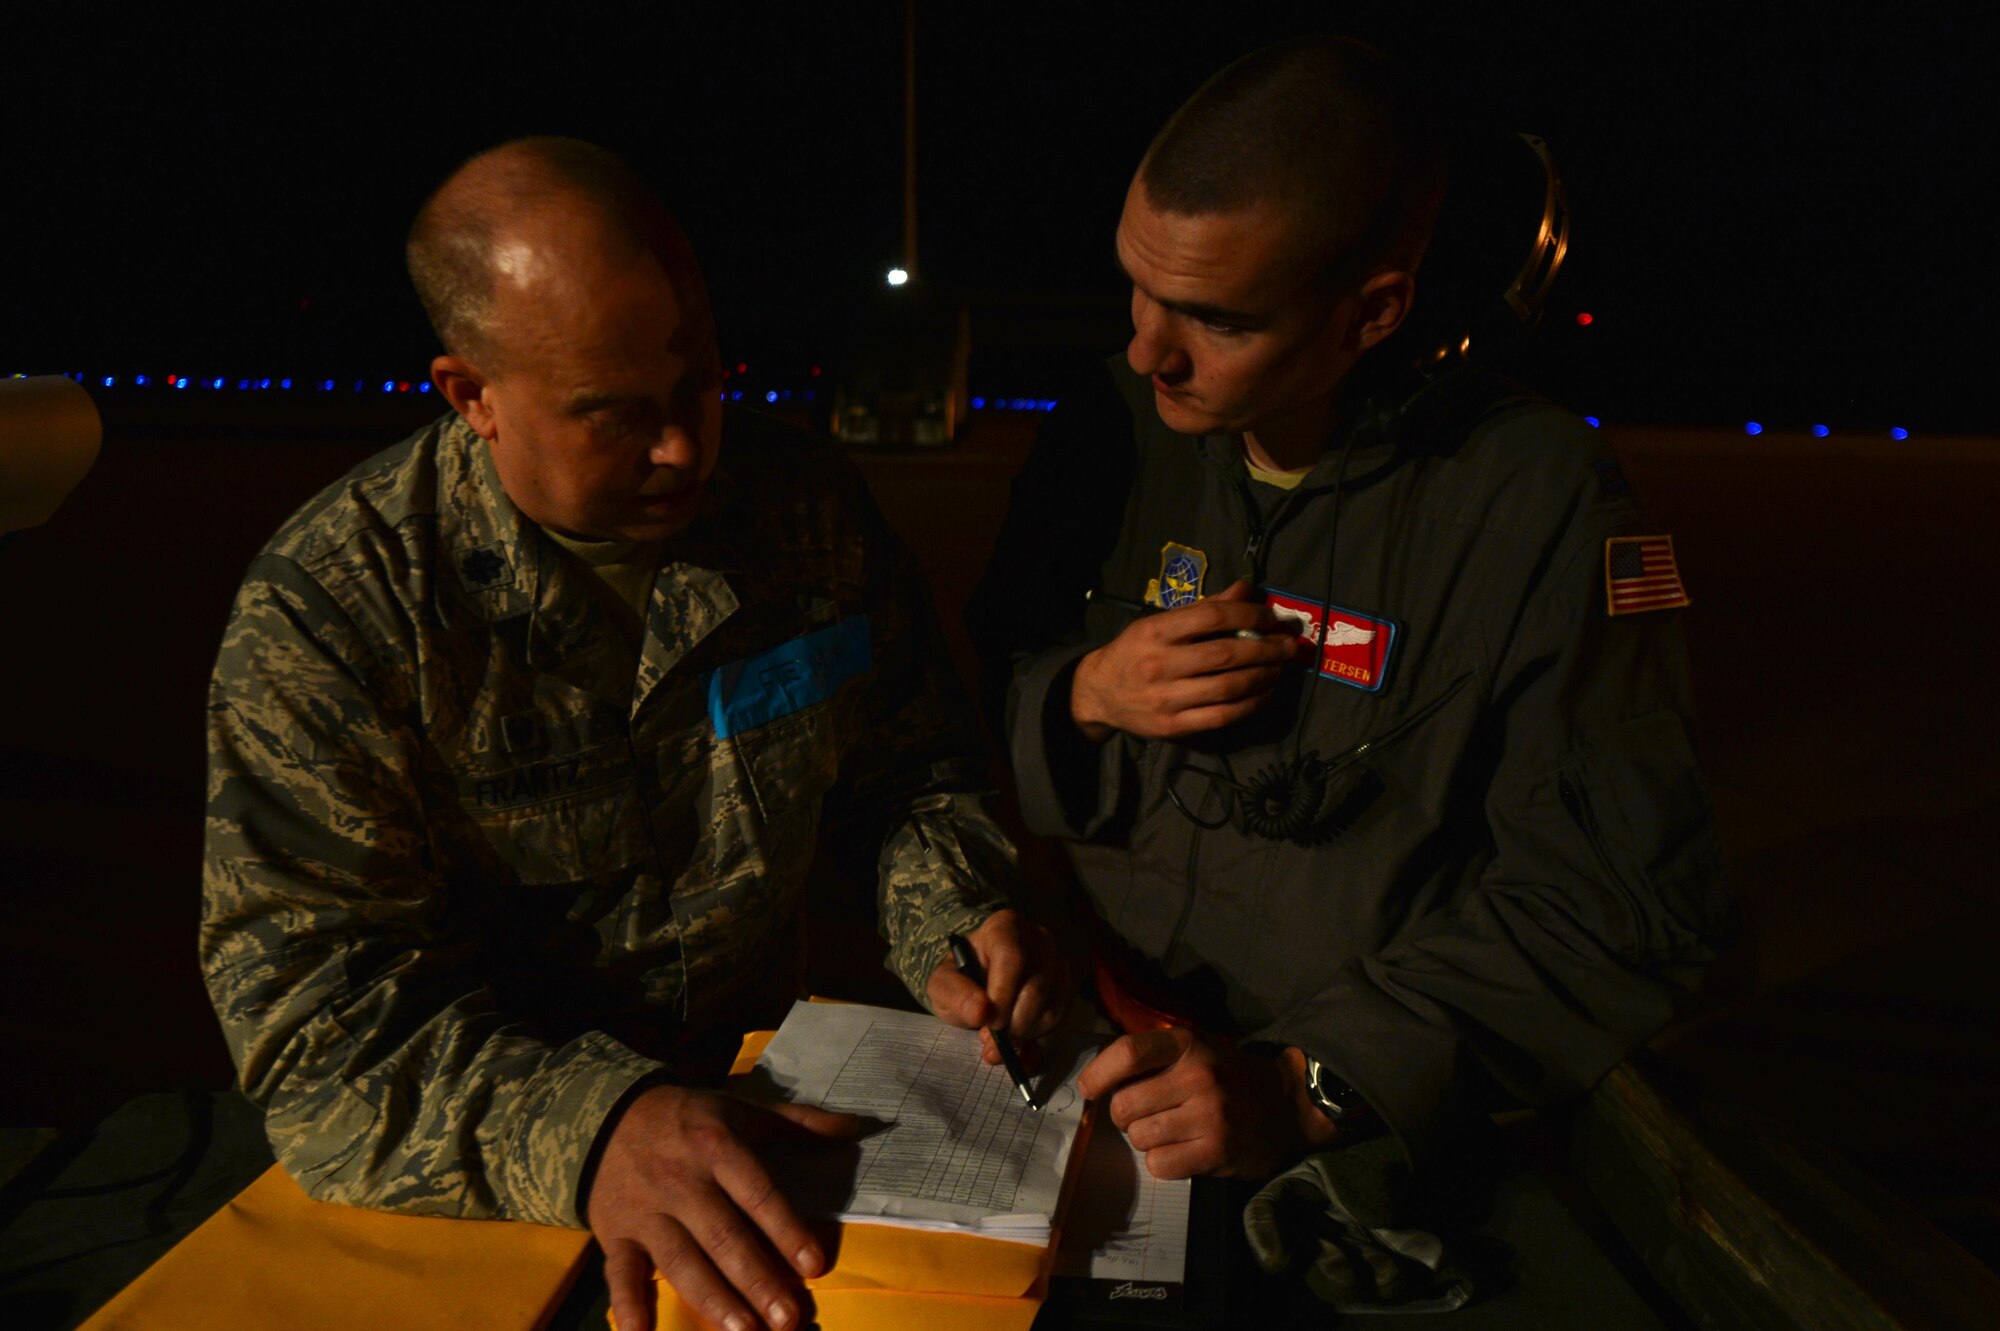 (From left) U.S. Air Force Lt. Col. Russ Frantz, 375th Aeromedical Squadron commander, acts as a federal emergency management agency member to brief U.S. Air Force Capt. Jordan Petersen, 375th Aeromedical Evacuation Squadron flight nurse, on patient care and procedures during exercise Tropical Storm Greg, Nov. 8, 2016, at Alexandria, Louisiana. The 375th AES team members created plans for transporting patients and their specific needs.  (U.S. Air Force photo by Airman Grace Nichols)